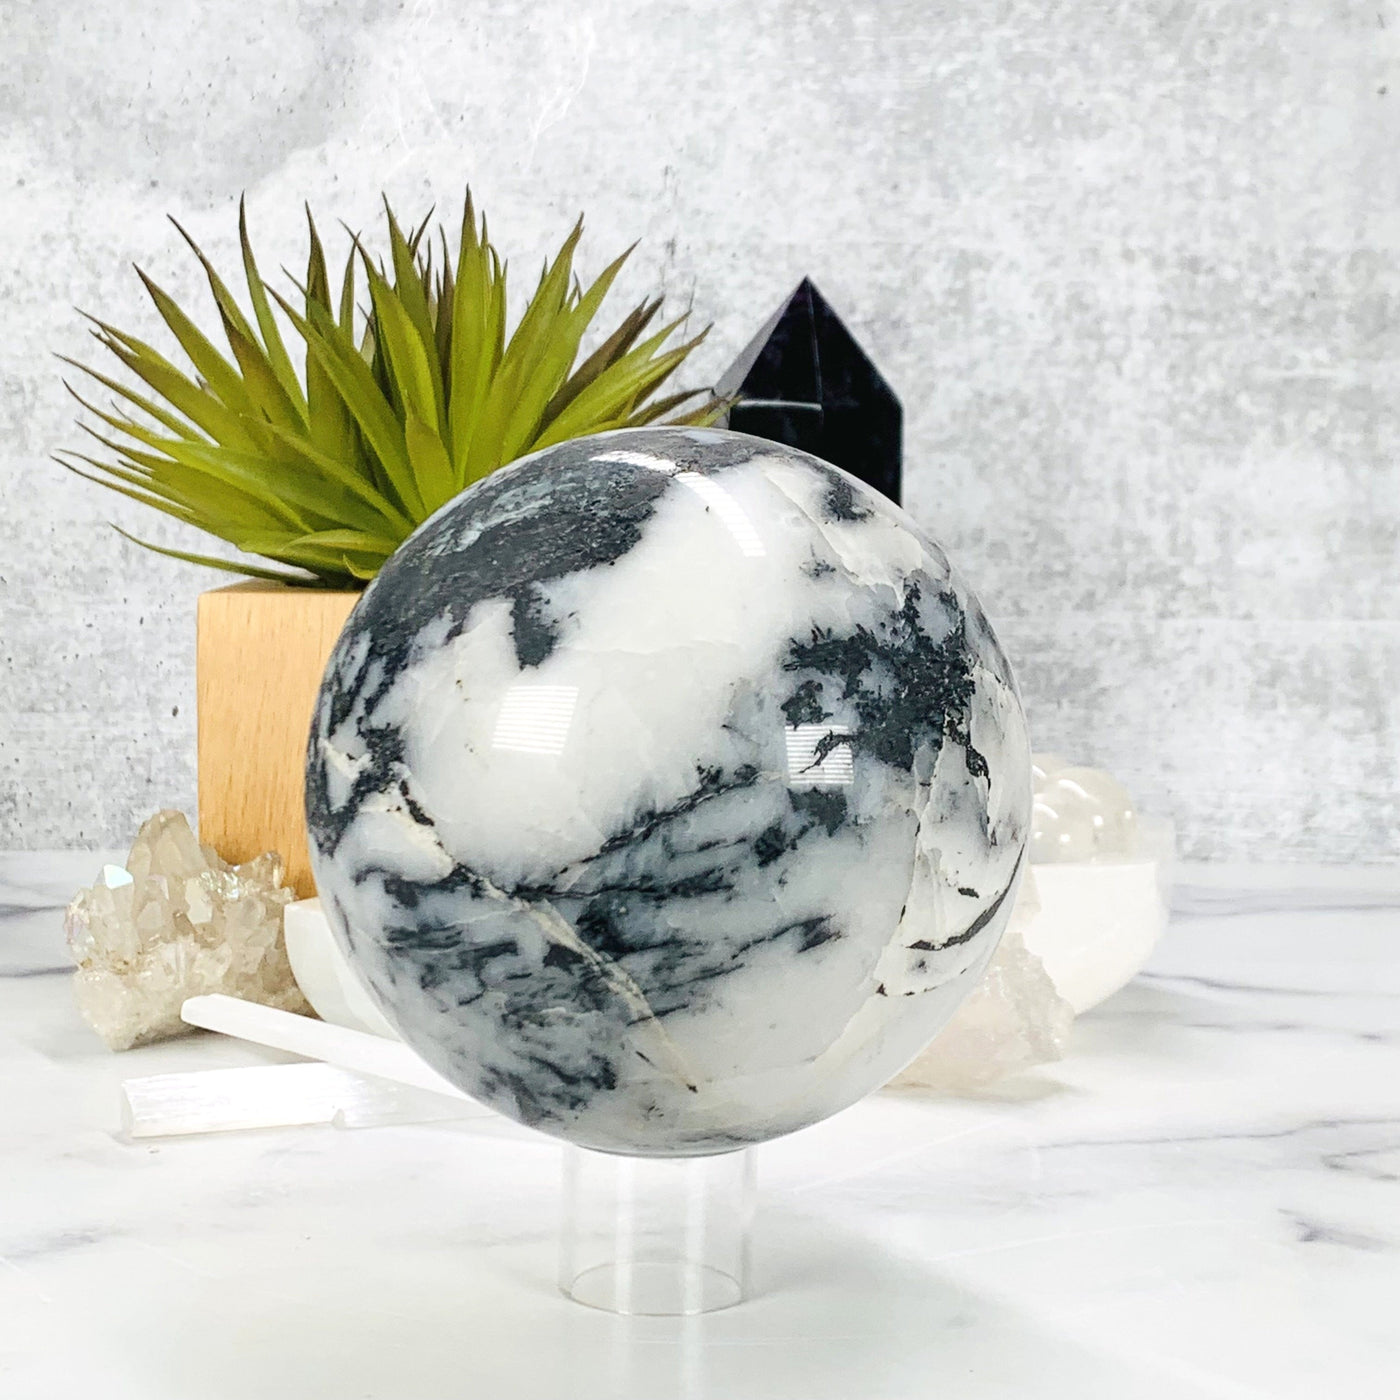 Frontside of the Zebra Jasper Polished Sphere on acrylic stand